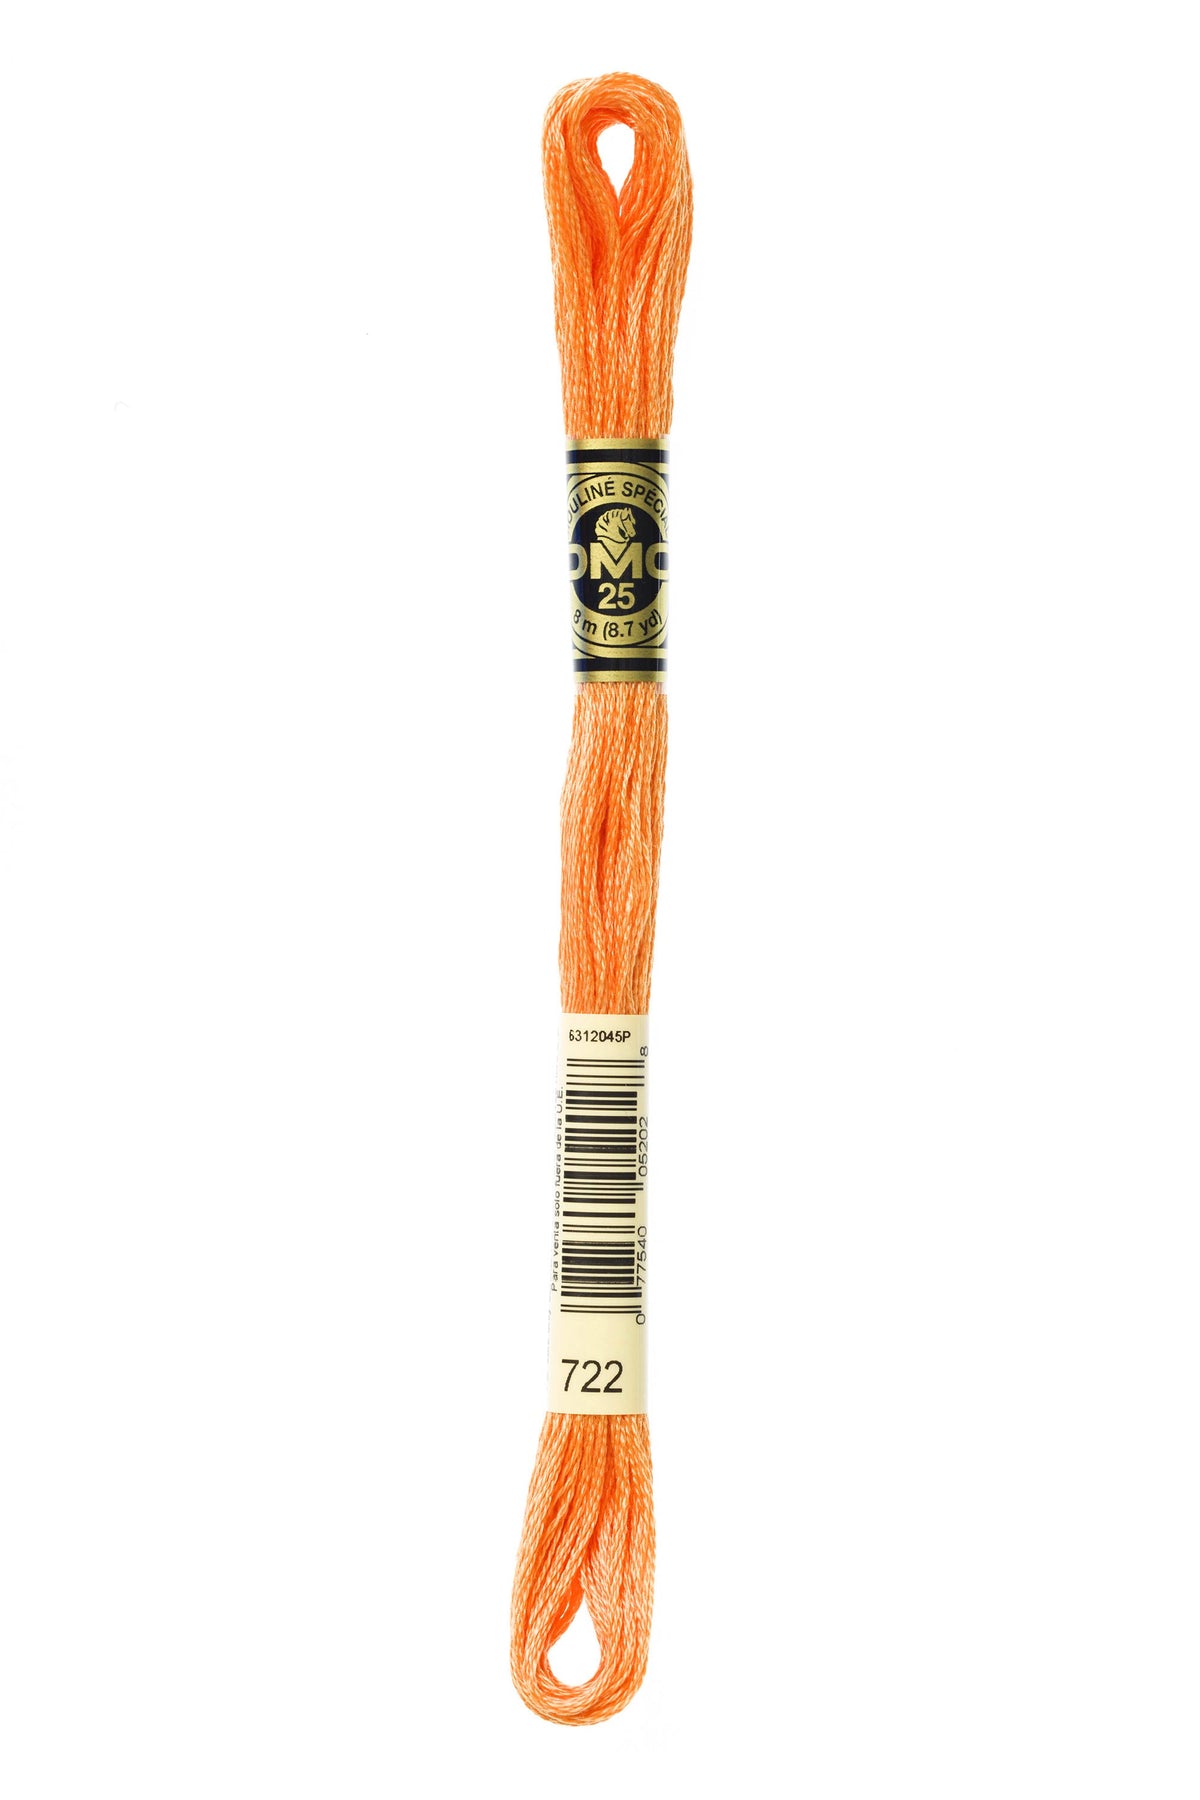 Cotton Six Stranded Embroidery Floss | DMC 703-915